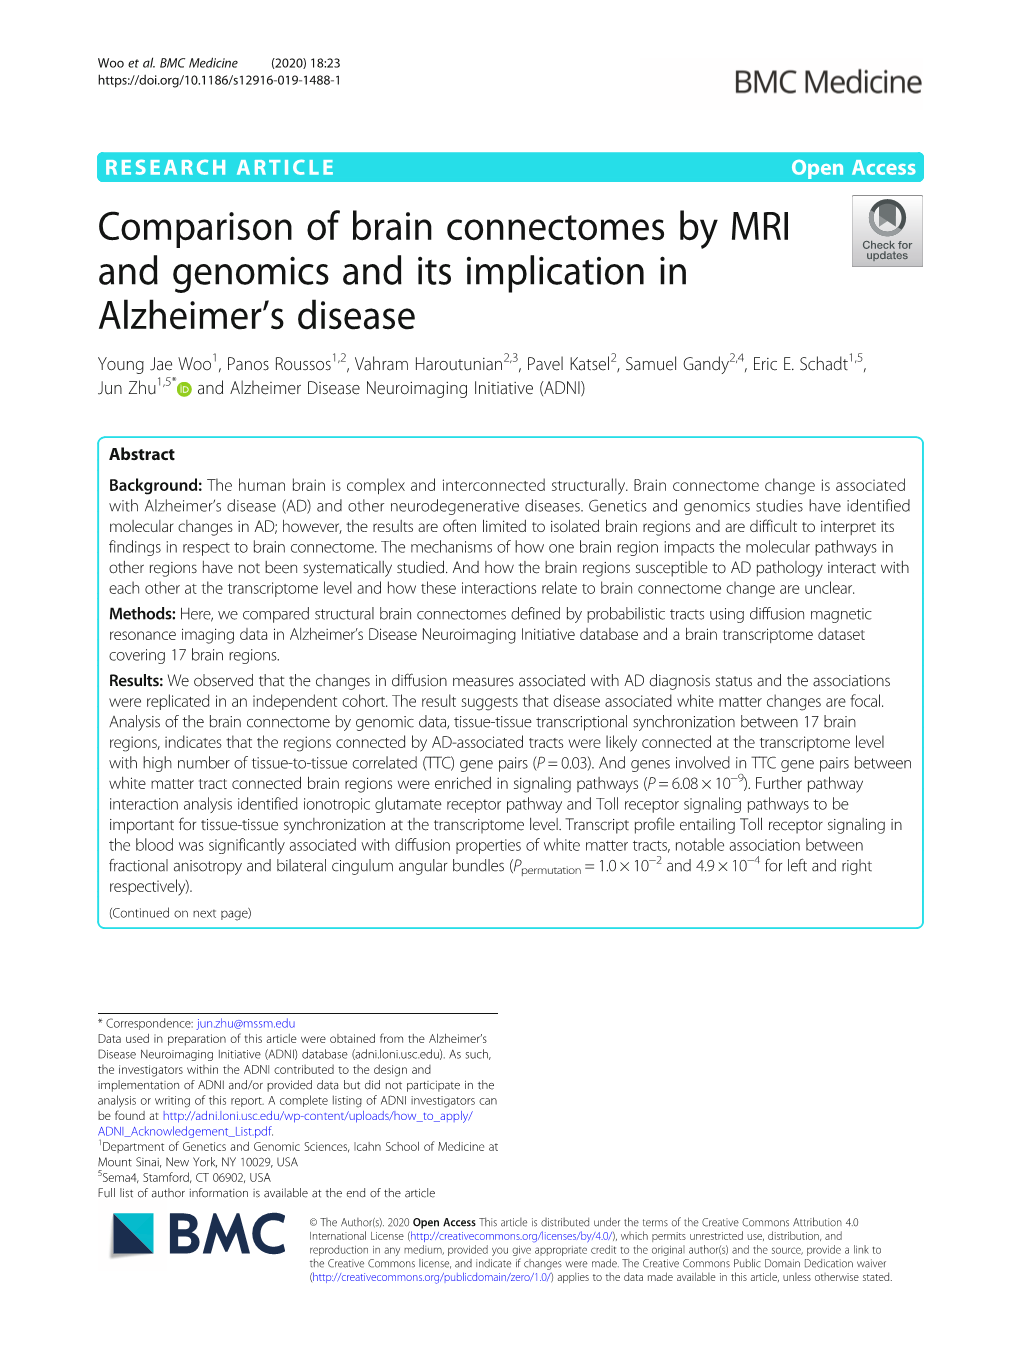 Comparison of Brain Connectomes by MRI and Genomics and Its